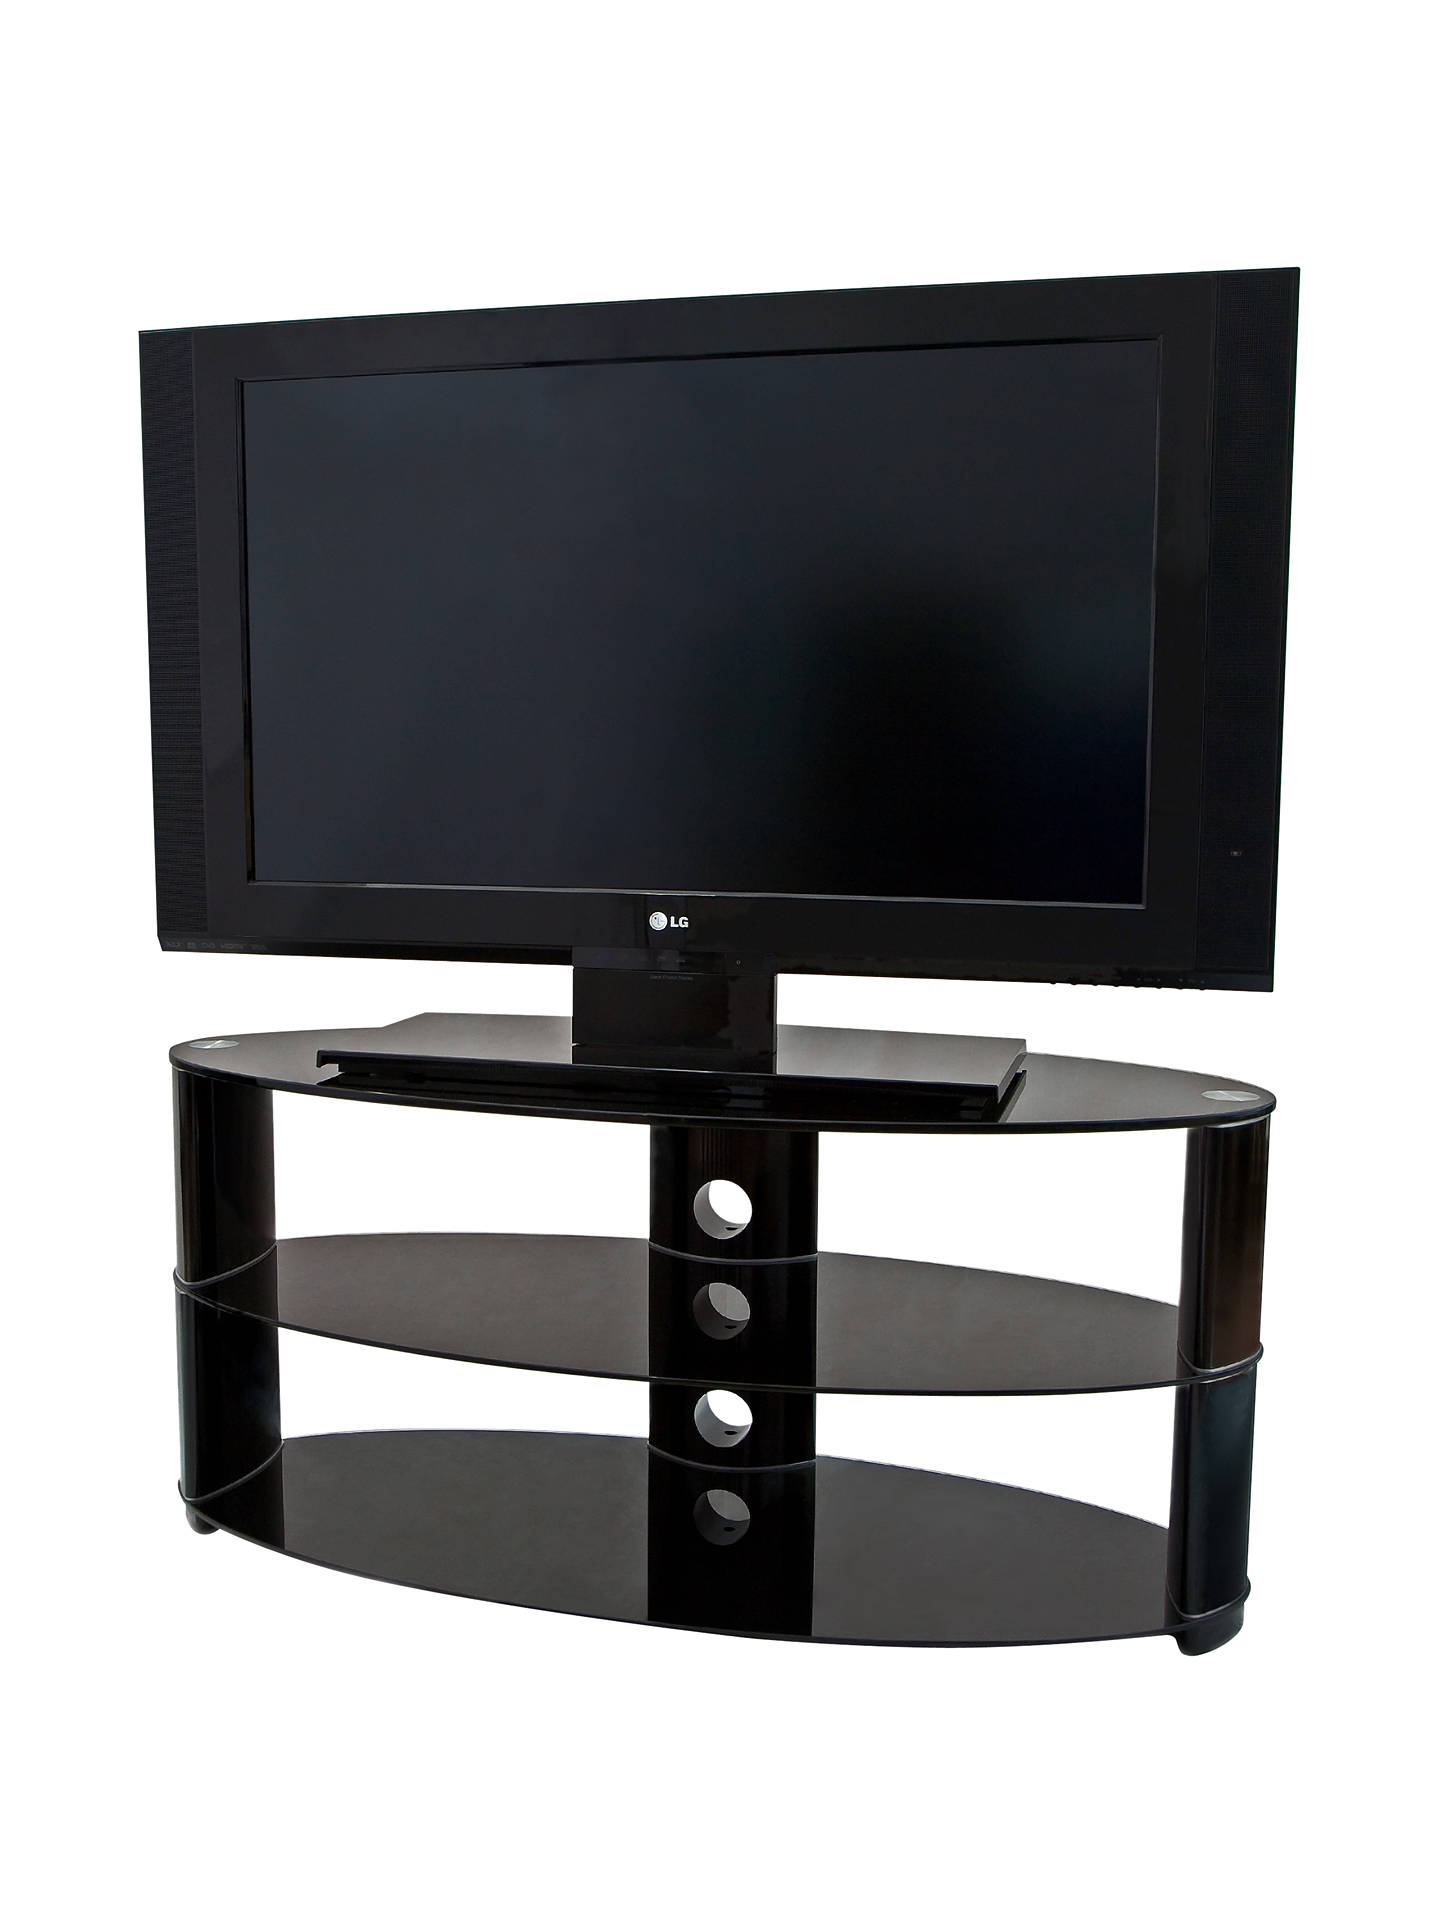 John Lewis JL1100/3BB Television Stand for TVs up to 51 ...